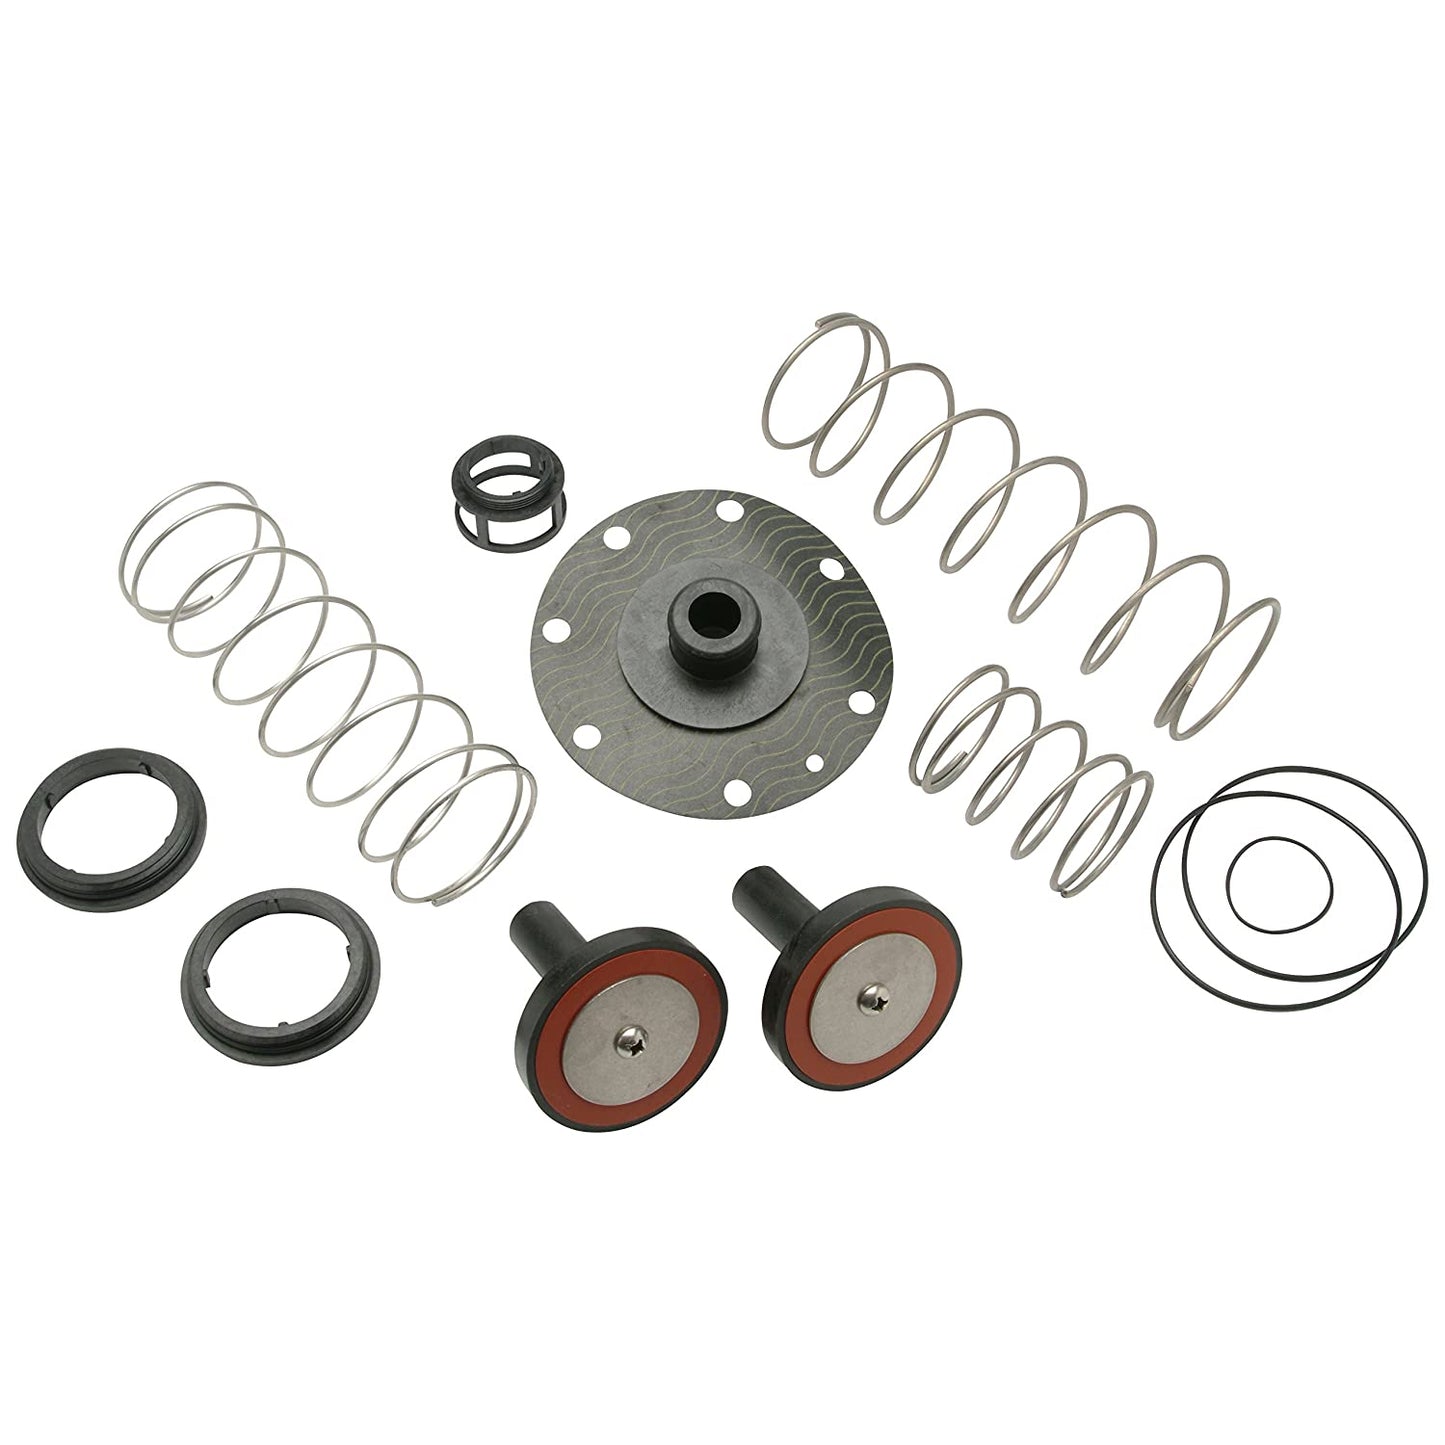 RK114-975XLC - 1-1/4" Complete Poppets Springs and Seats Repair Kit for Models 975XL/ 975XL2